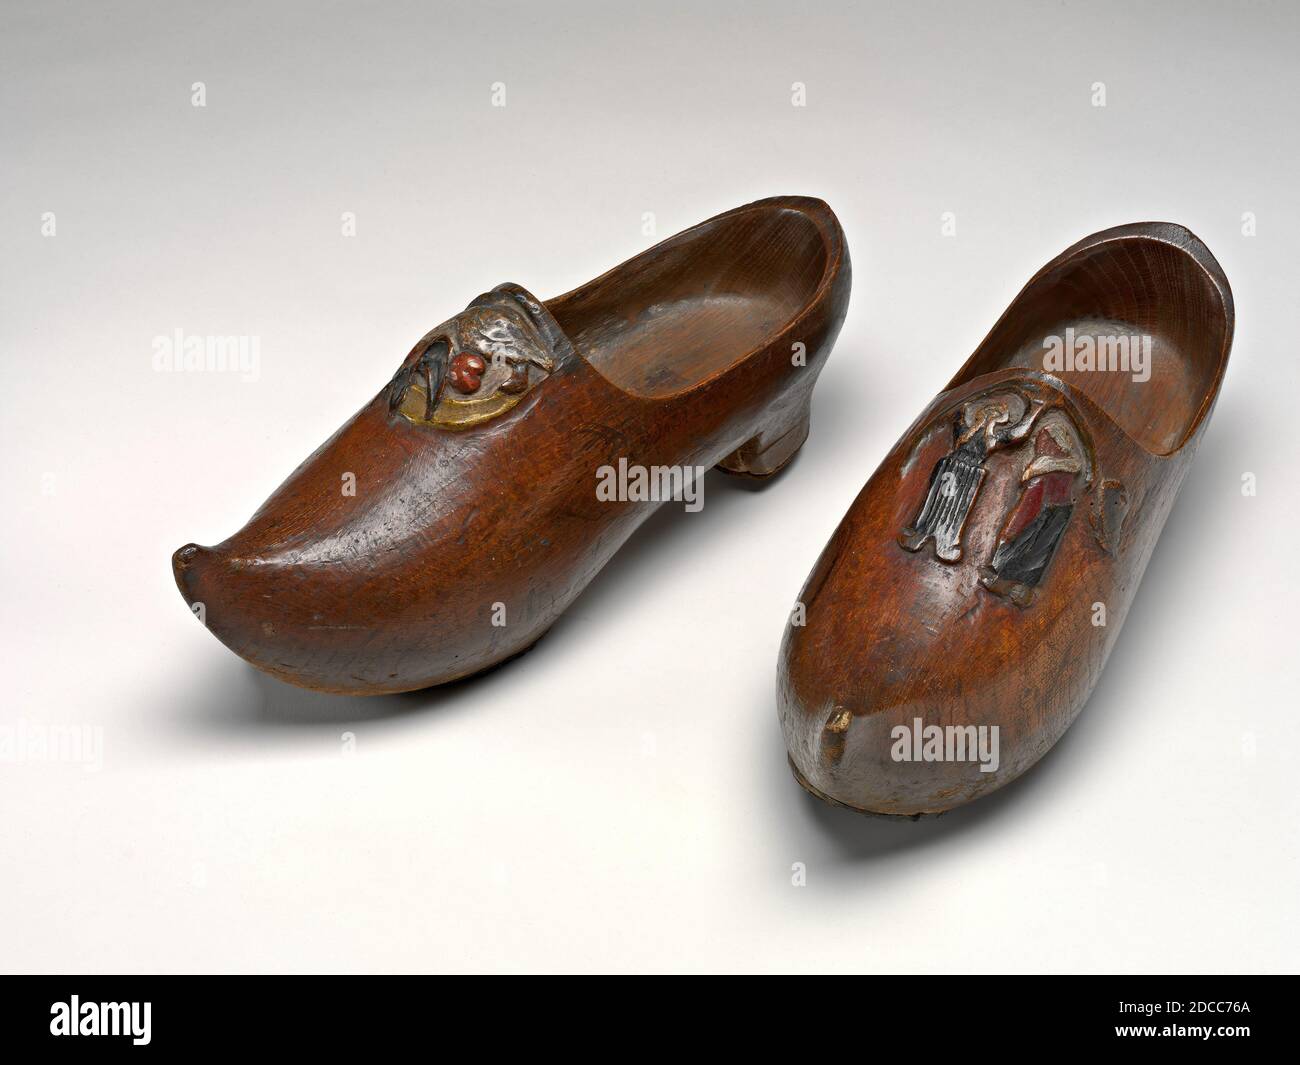 Paul Gauguin, (artist), French, 1848 - 1903, Pair of Wooden Shoes (Sabots), 1889/1890, polychromed oak, leather, and iron nails, overall: 12.8 x 32.7 x 11.2 cm (5 1/16 x 12 7/8 x 4 7/16 in Stock Photo